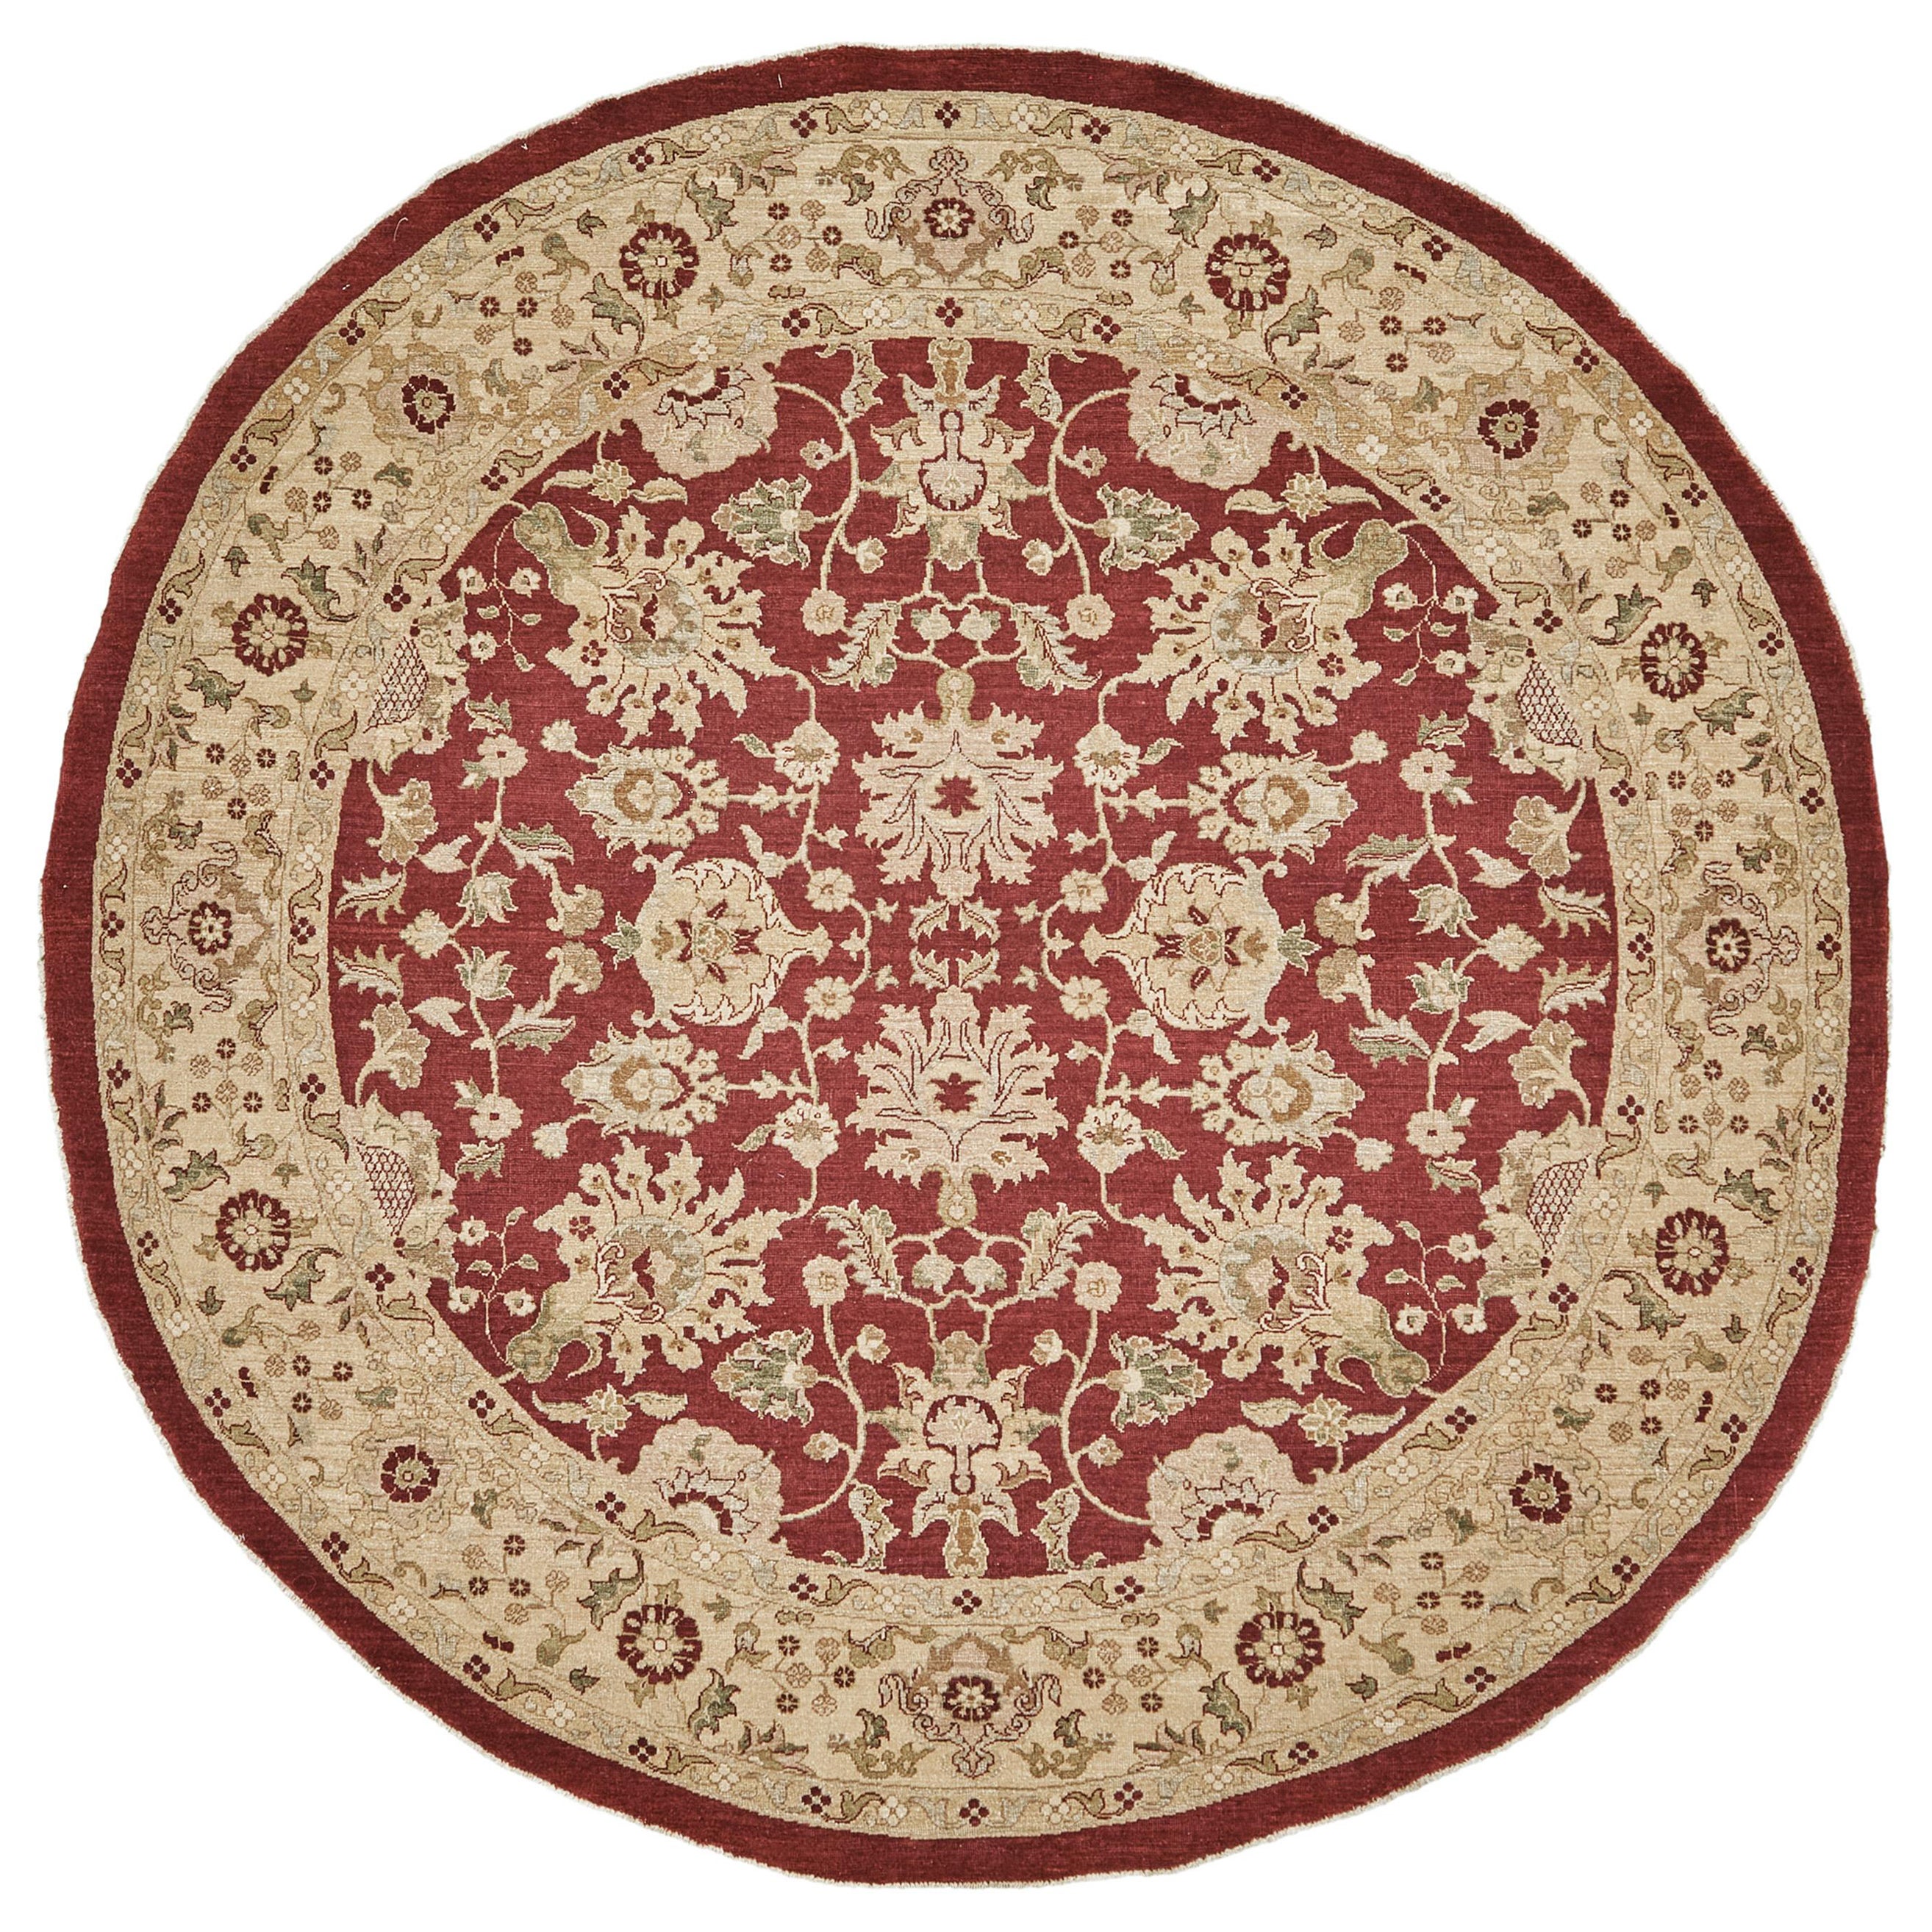 Natural Dye Sultanabad Revival Round Rug For Sale